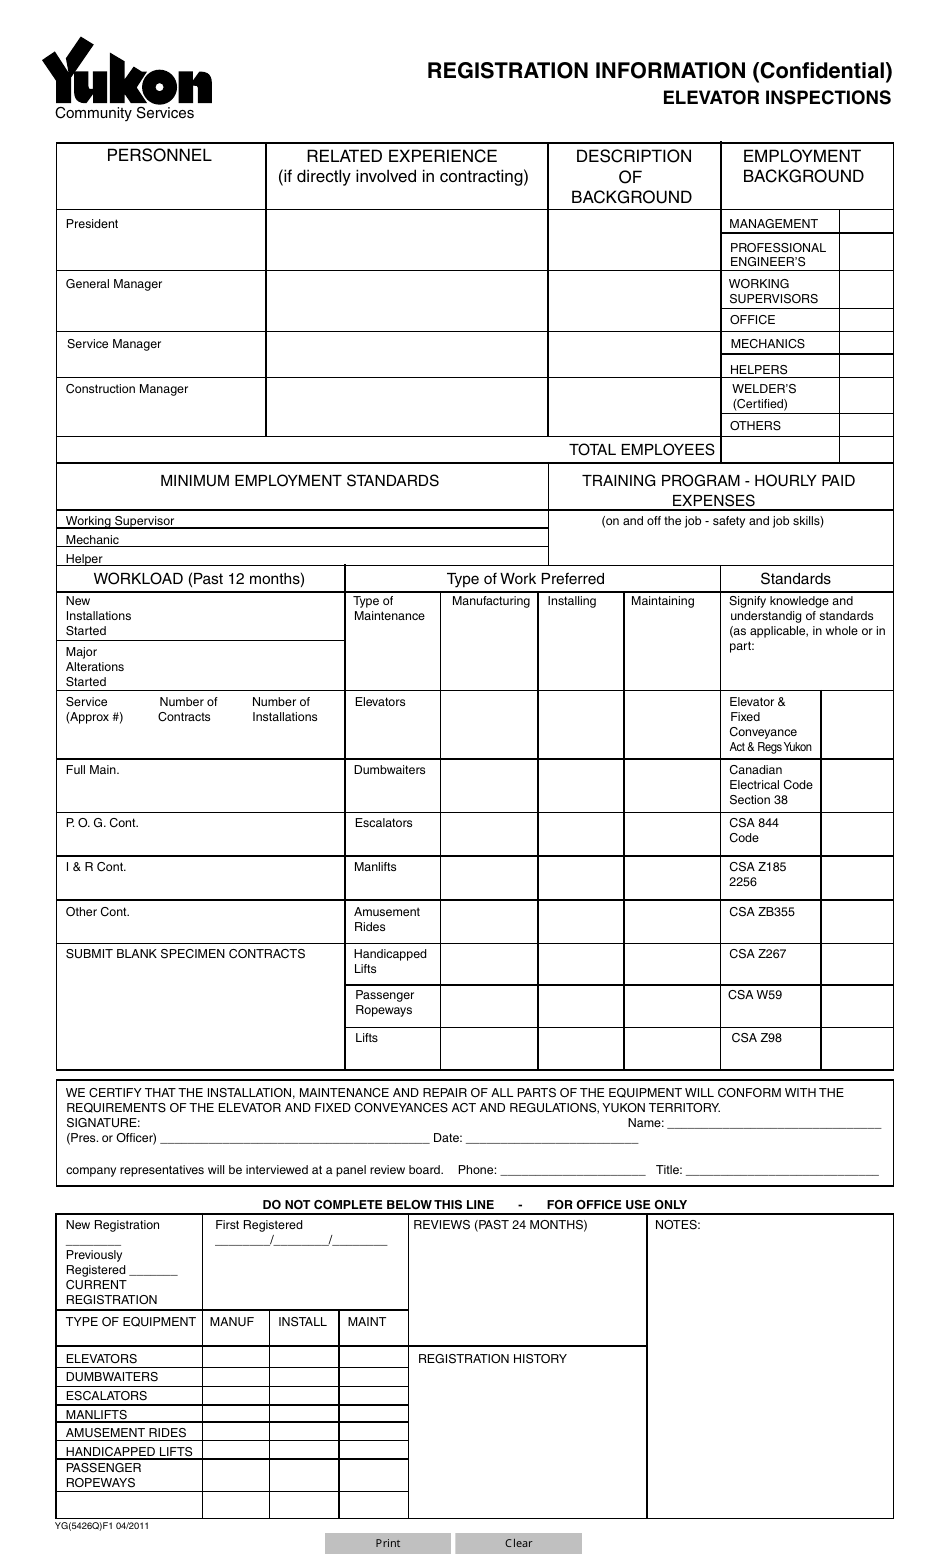 Form YG5426 Registration Information (Confidential) - Elevator Inspections - Yukon, Canada, Page 1